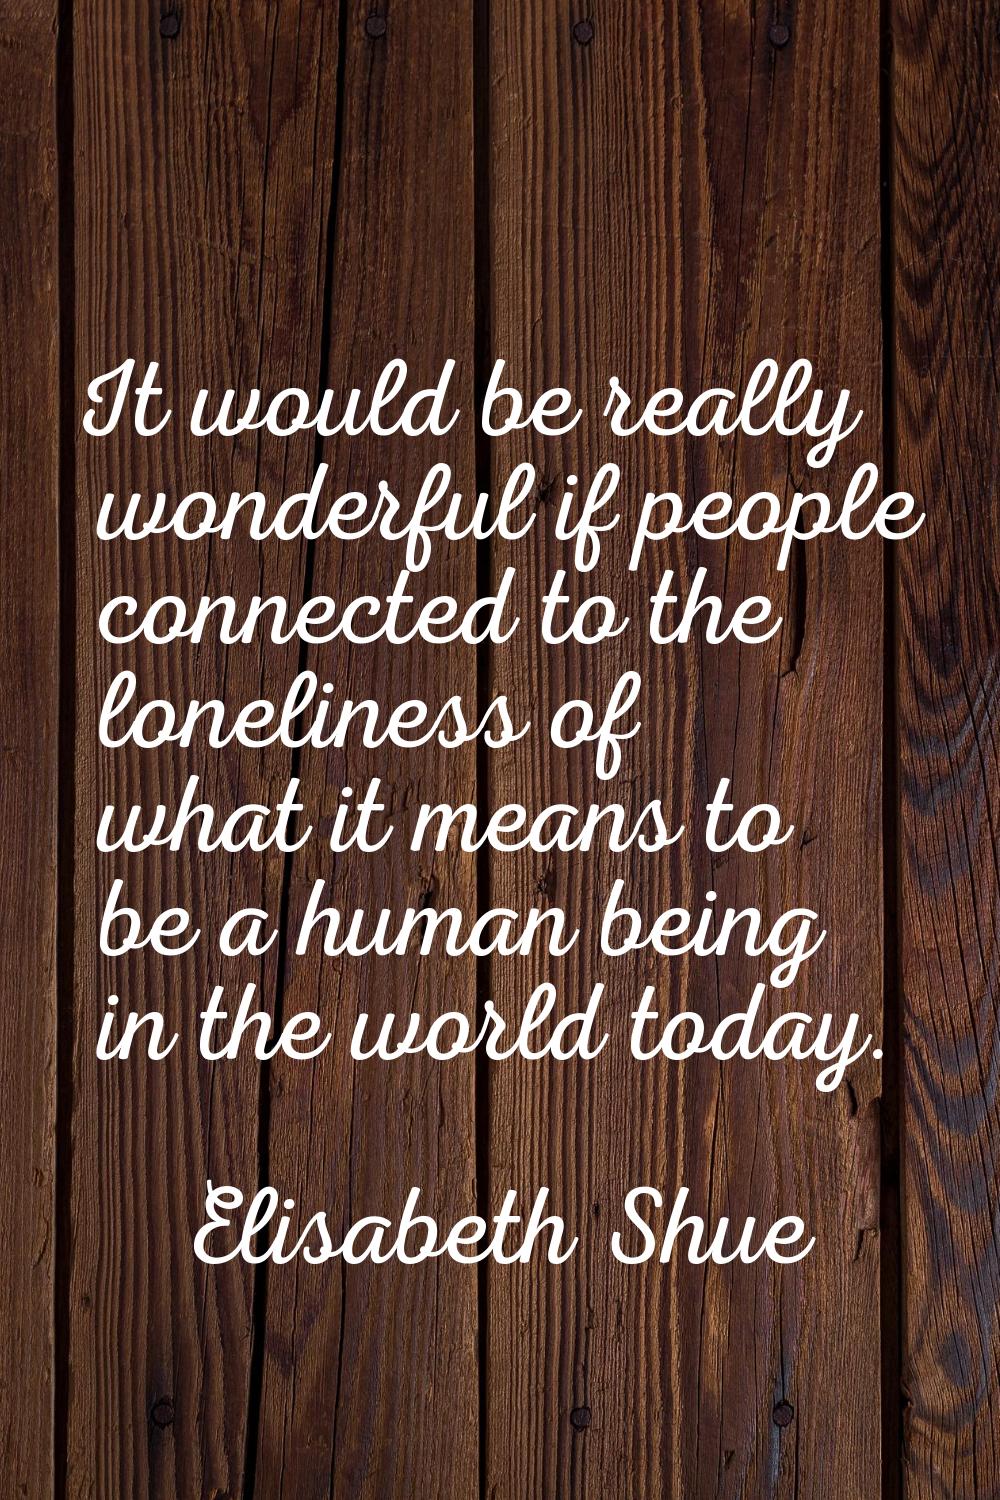 It would be really wonderful if people connected to the loneliness of what it means to be a human b